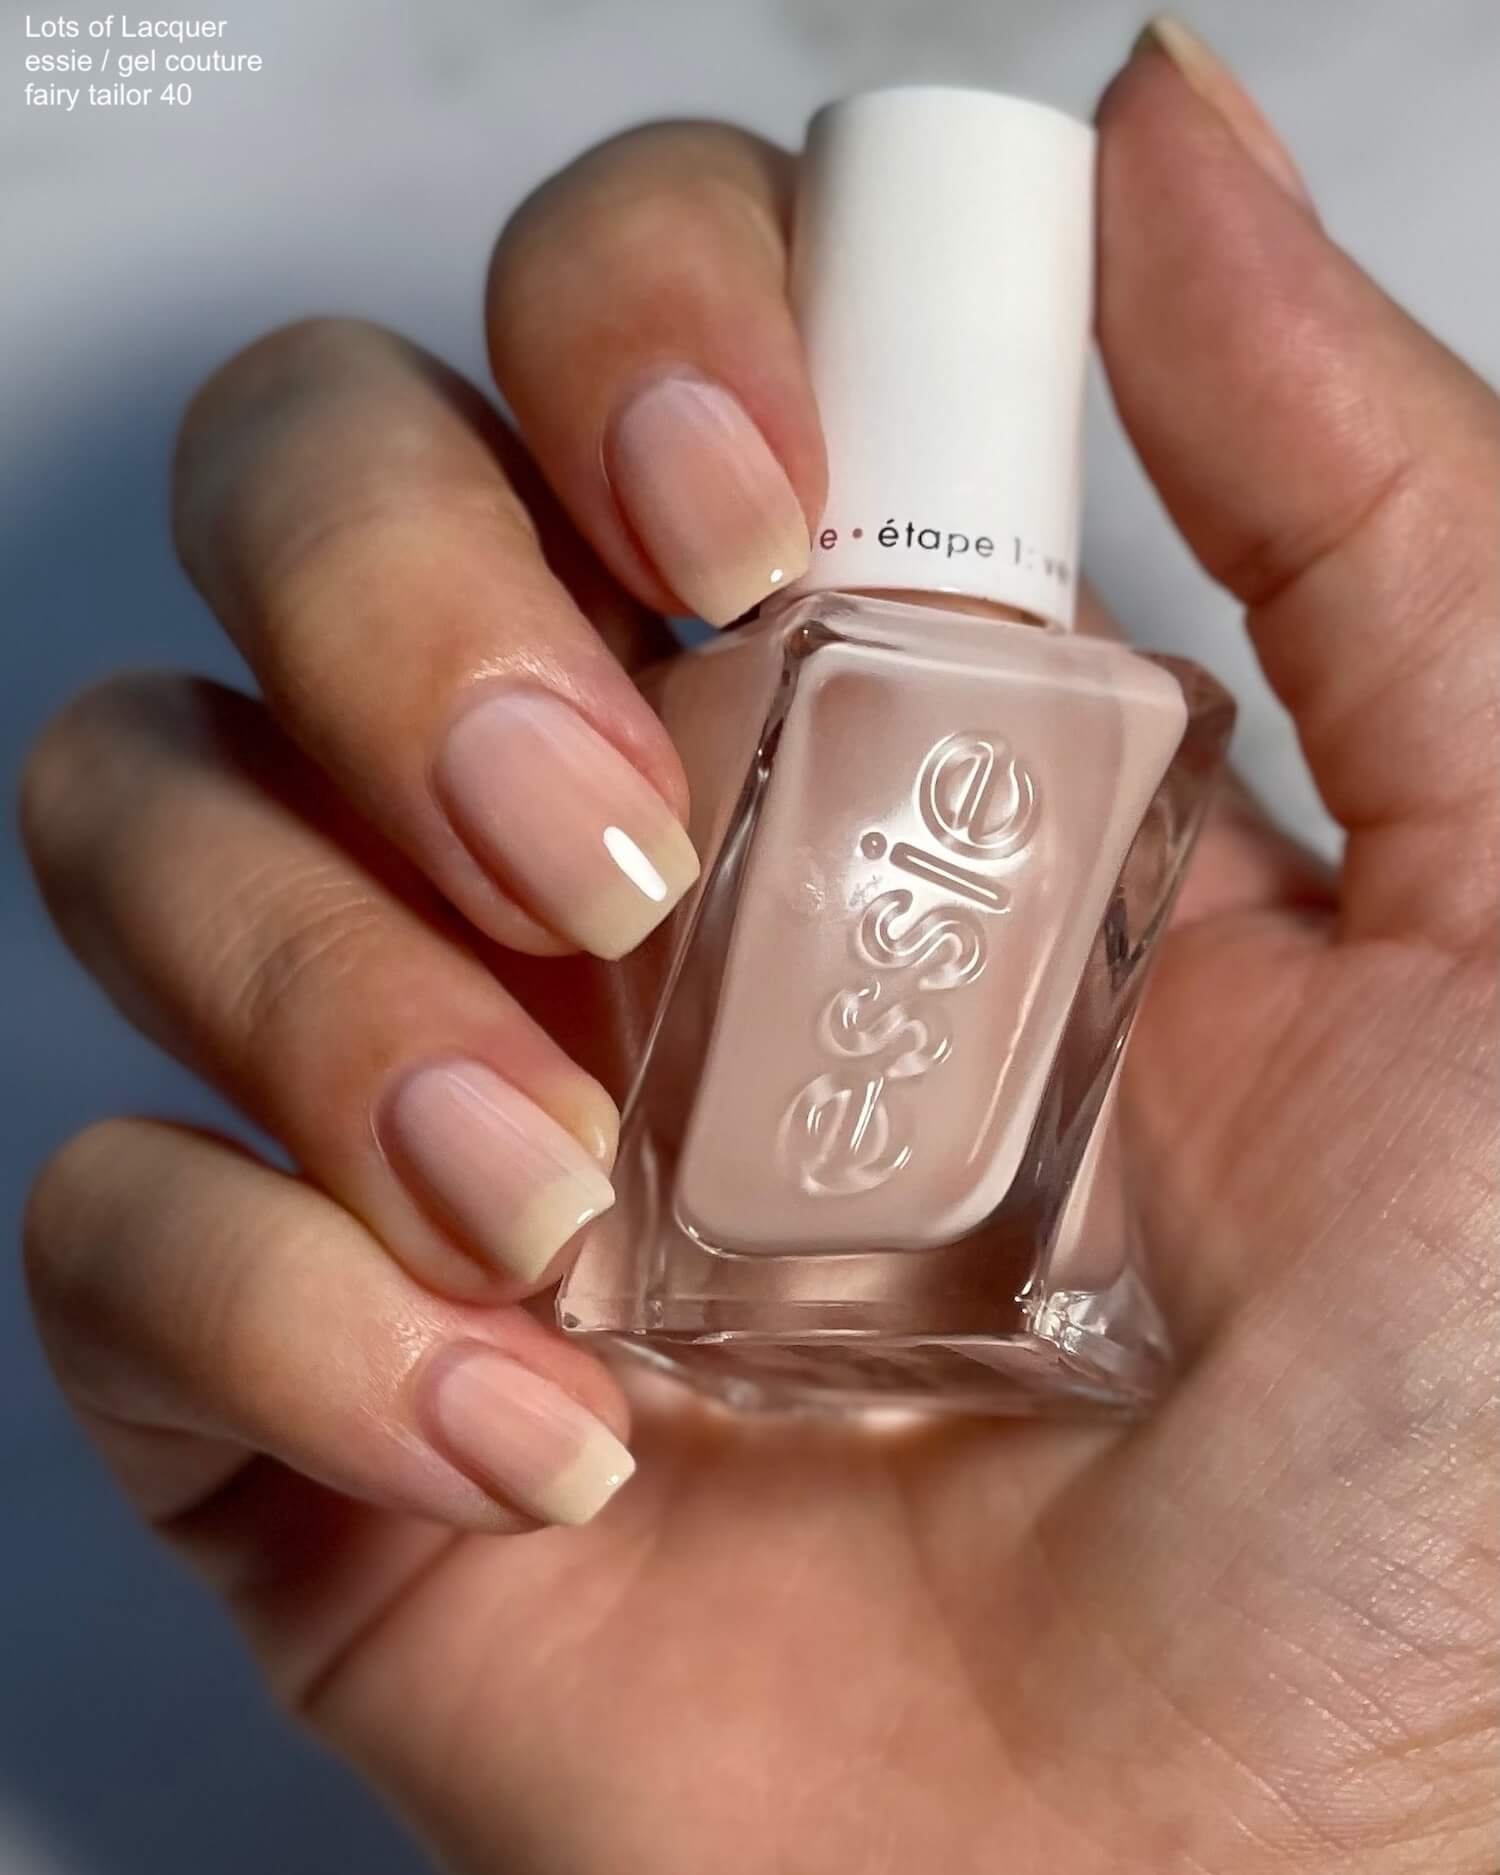 essie gel couture fairy tailor Review + Swatches — Lots of Lacquer